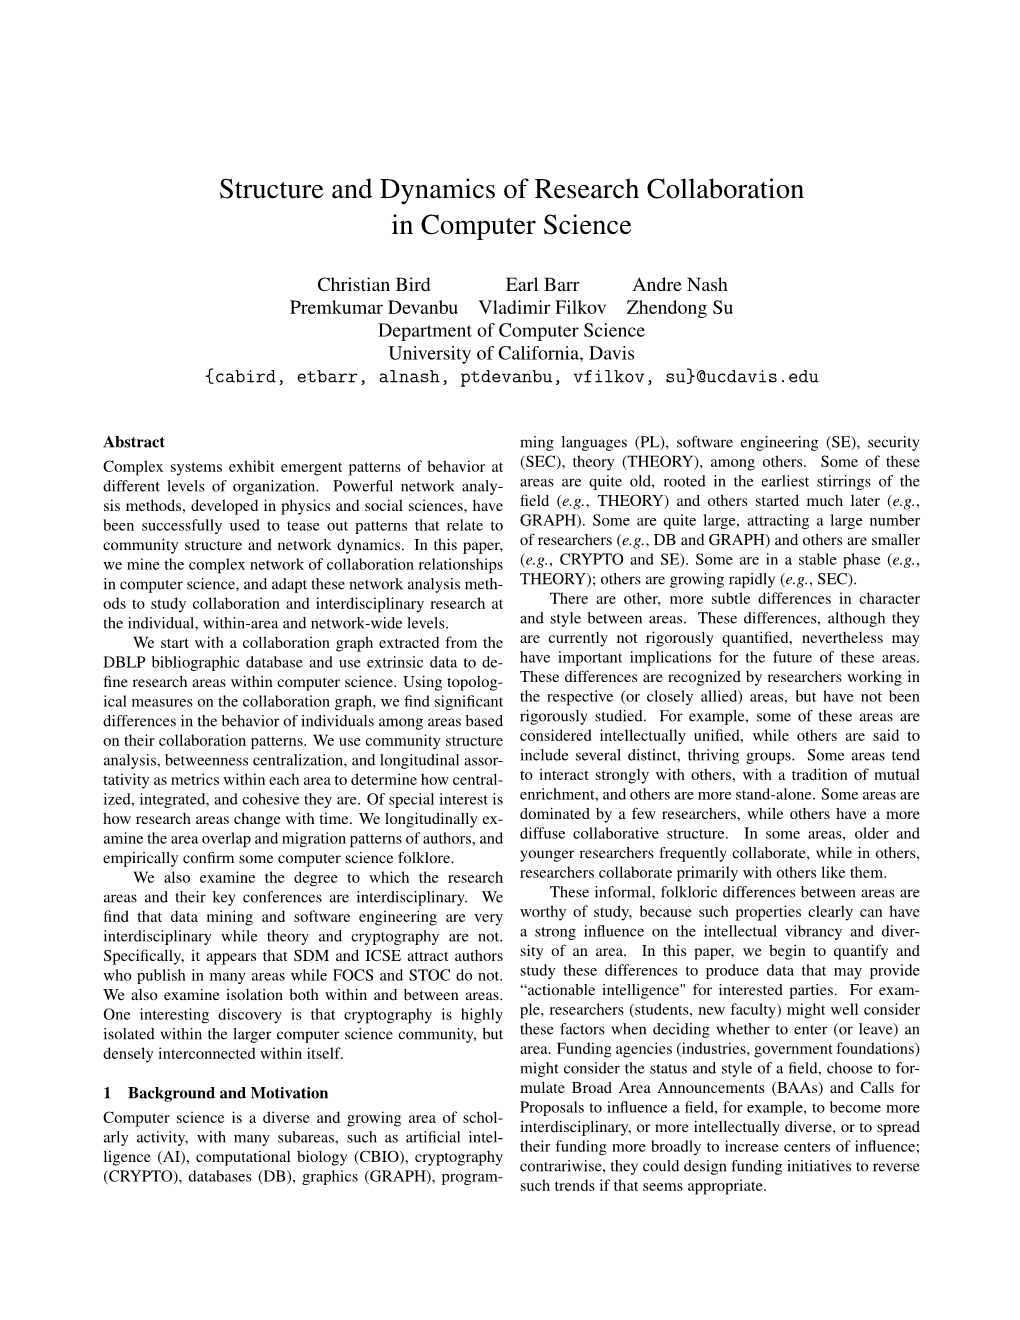 Structure and Dynamics of Research Collaboration in Computer Science